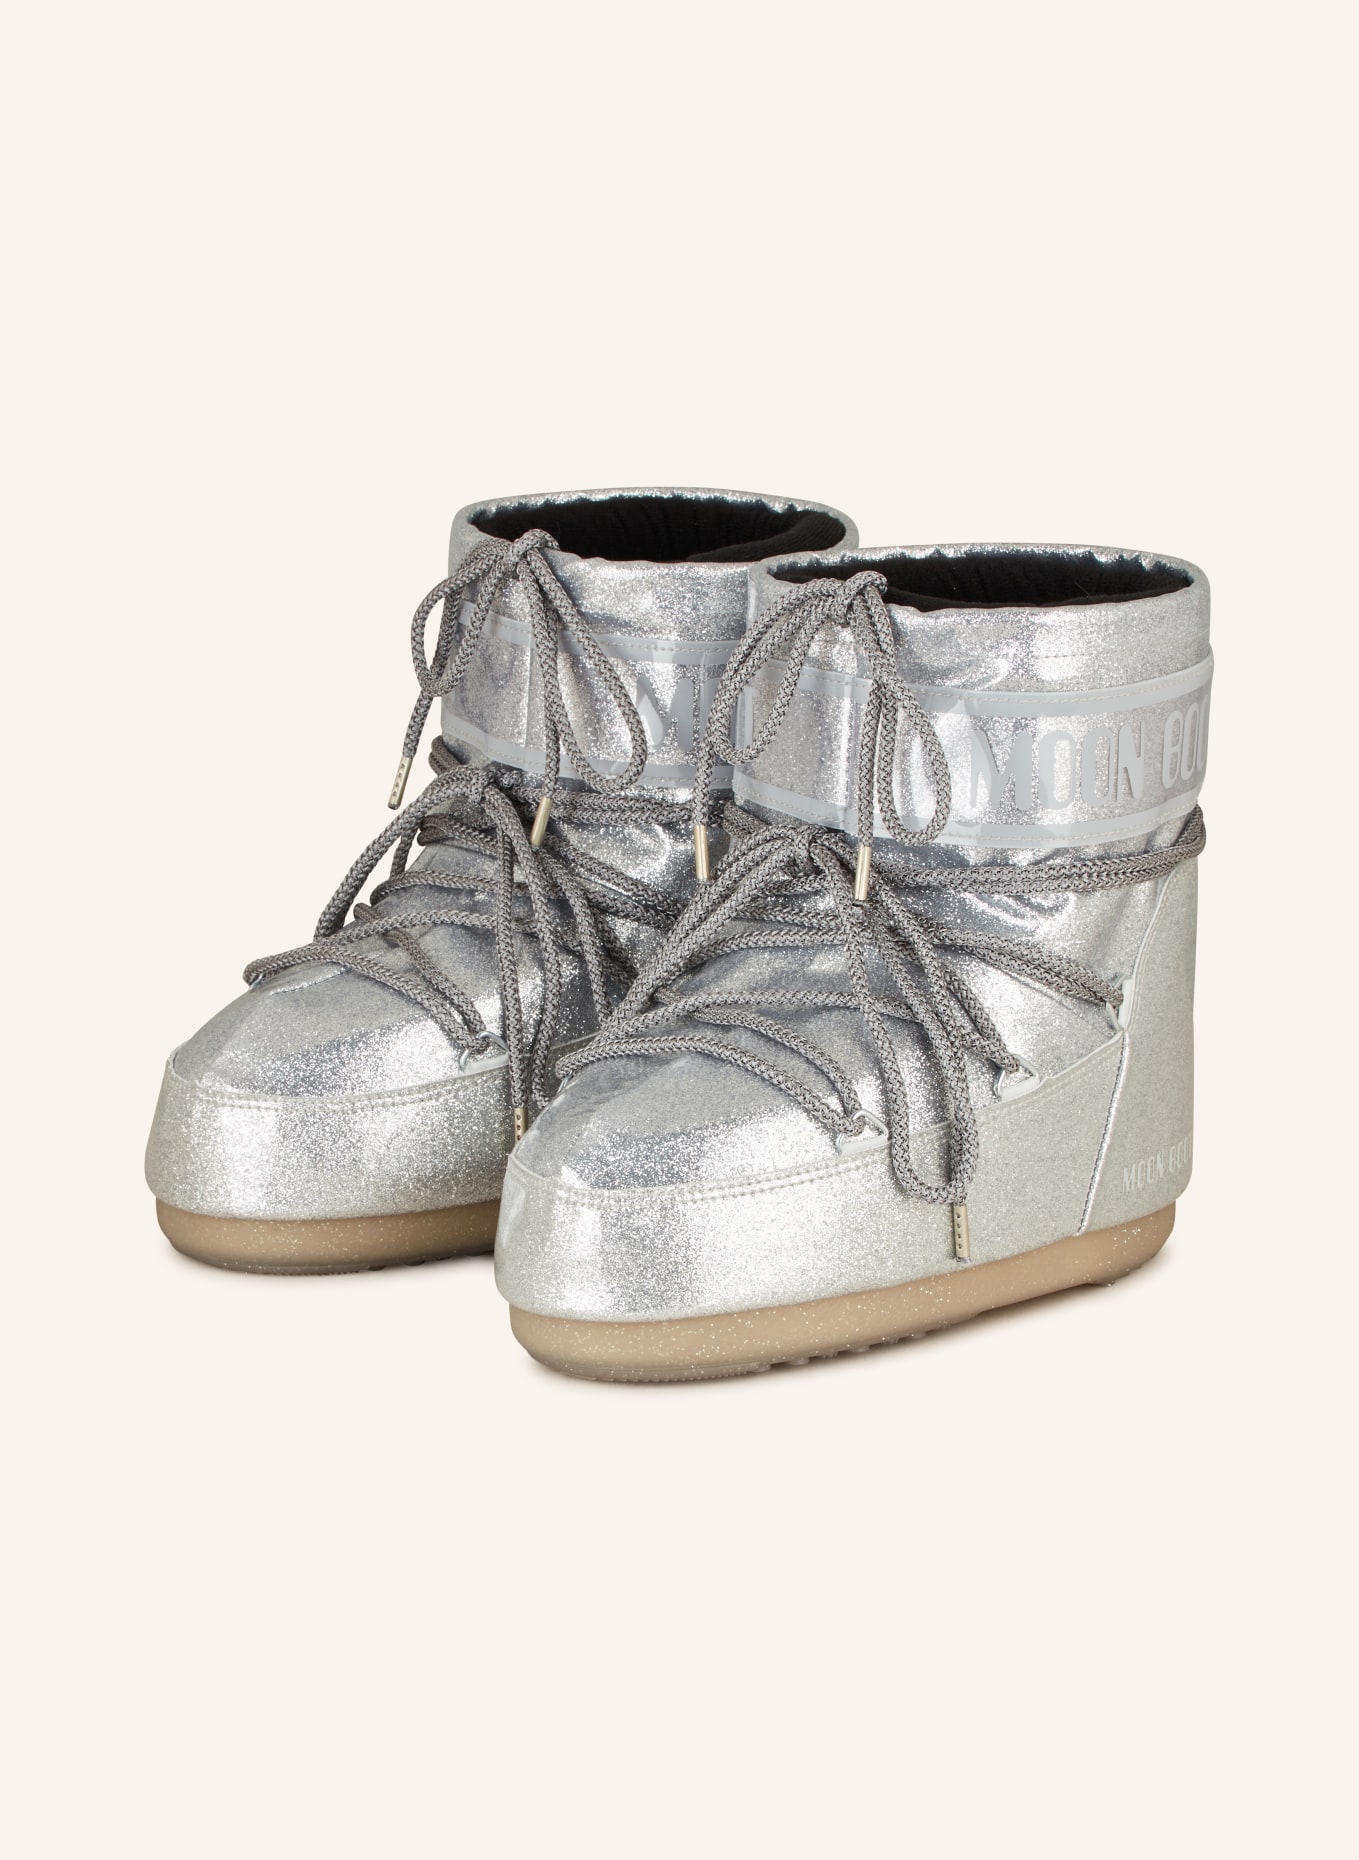 MOON BOOT Moon Boots ICON LOW GLITTER, Farbe: SILBER (Bild 1)